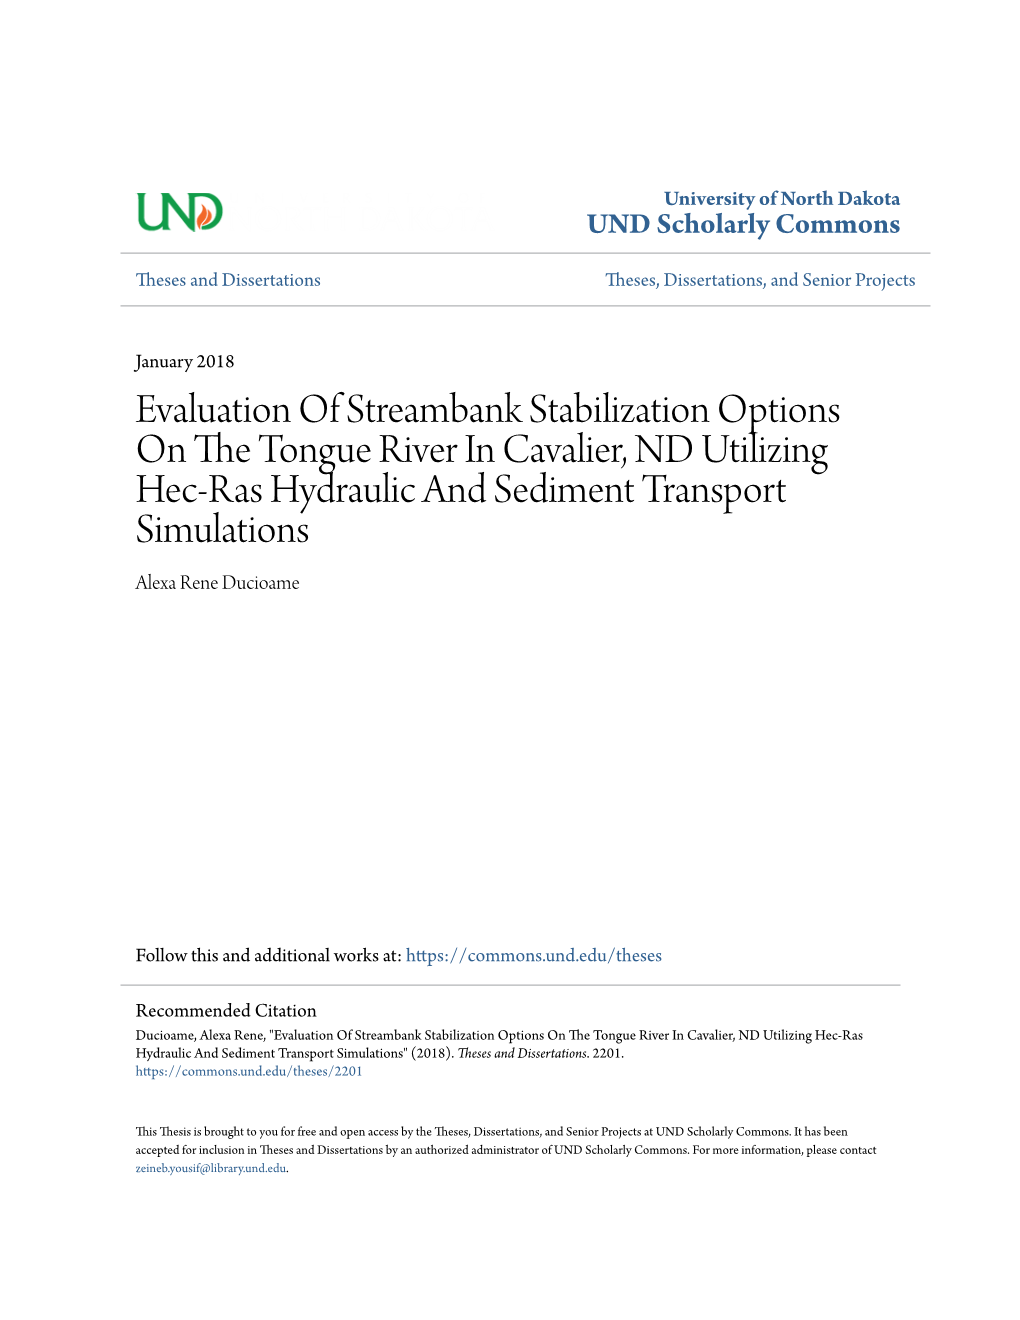 Evaluation of Streambank Stabilization Options on the Ont Gue River in Cavalier, ND Utilizing Hec-Ras Hydraulic and Sediment Transport Simulations Alexa Rene Ducioame